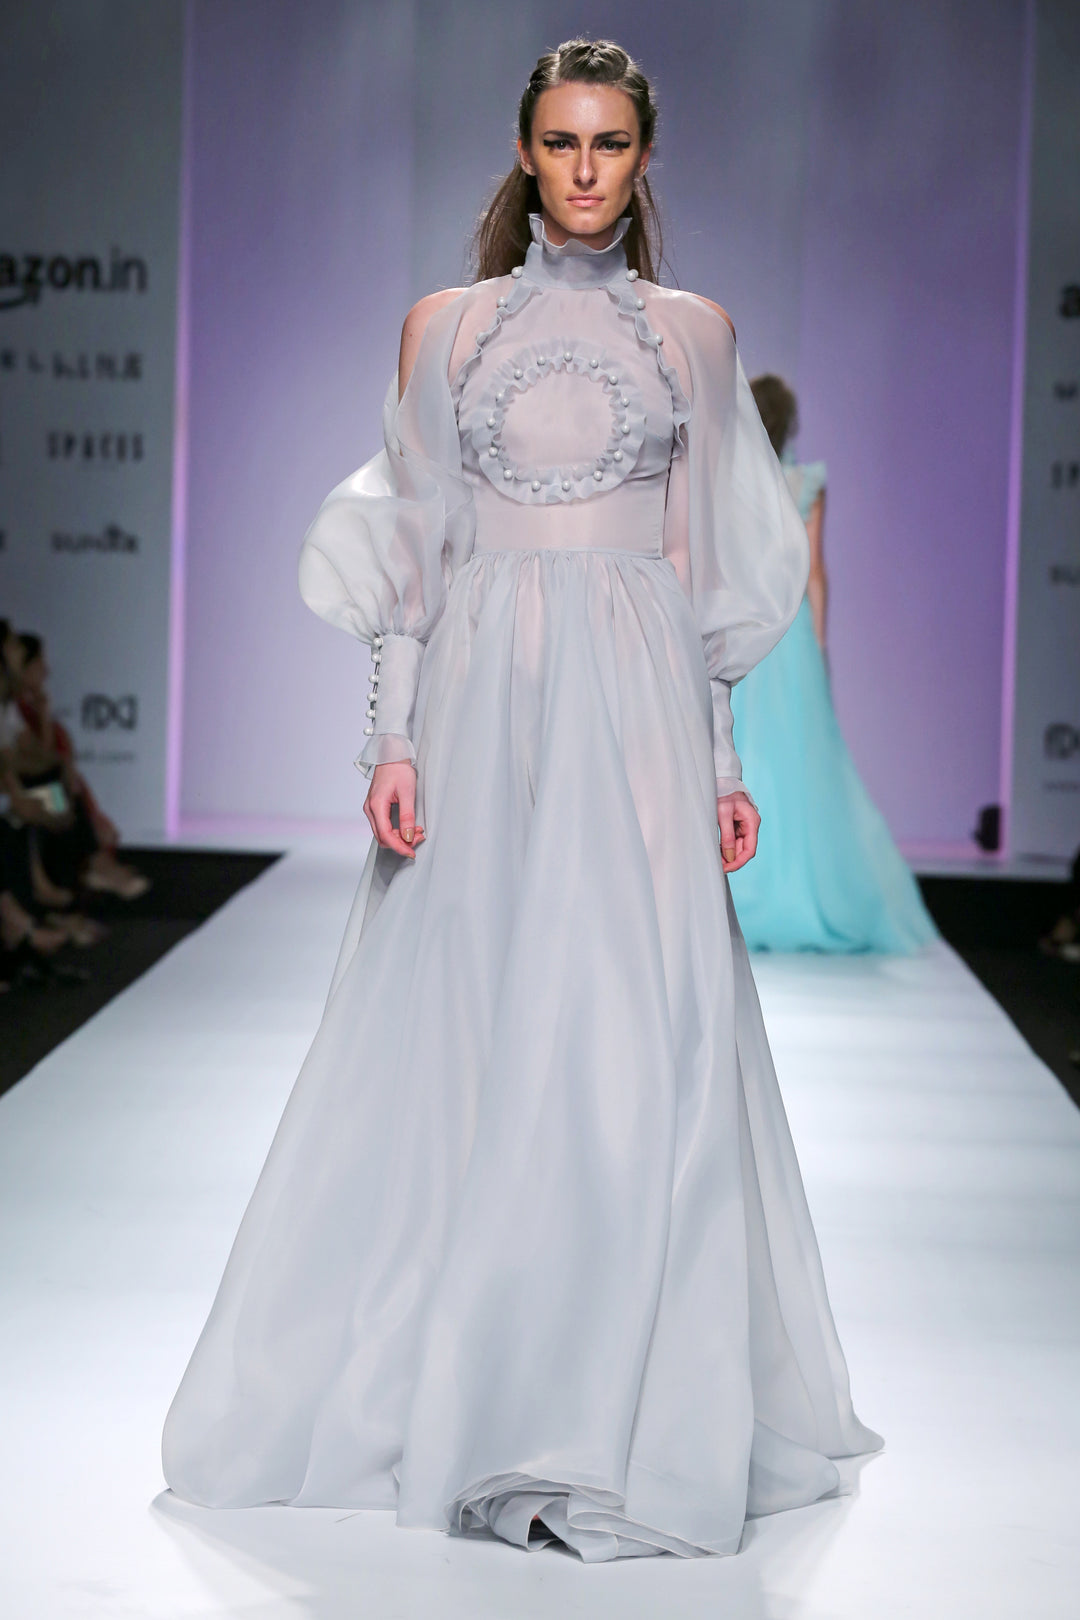 High collared gown with long pouf sleeves and frill texturing